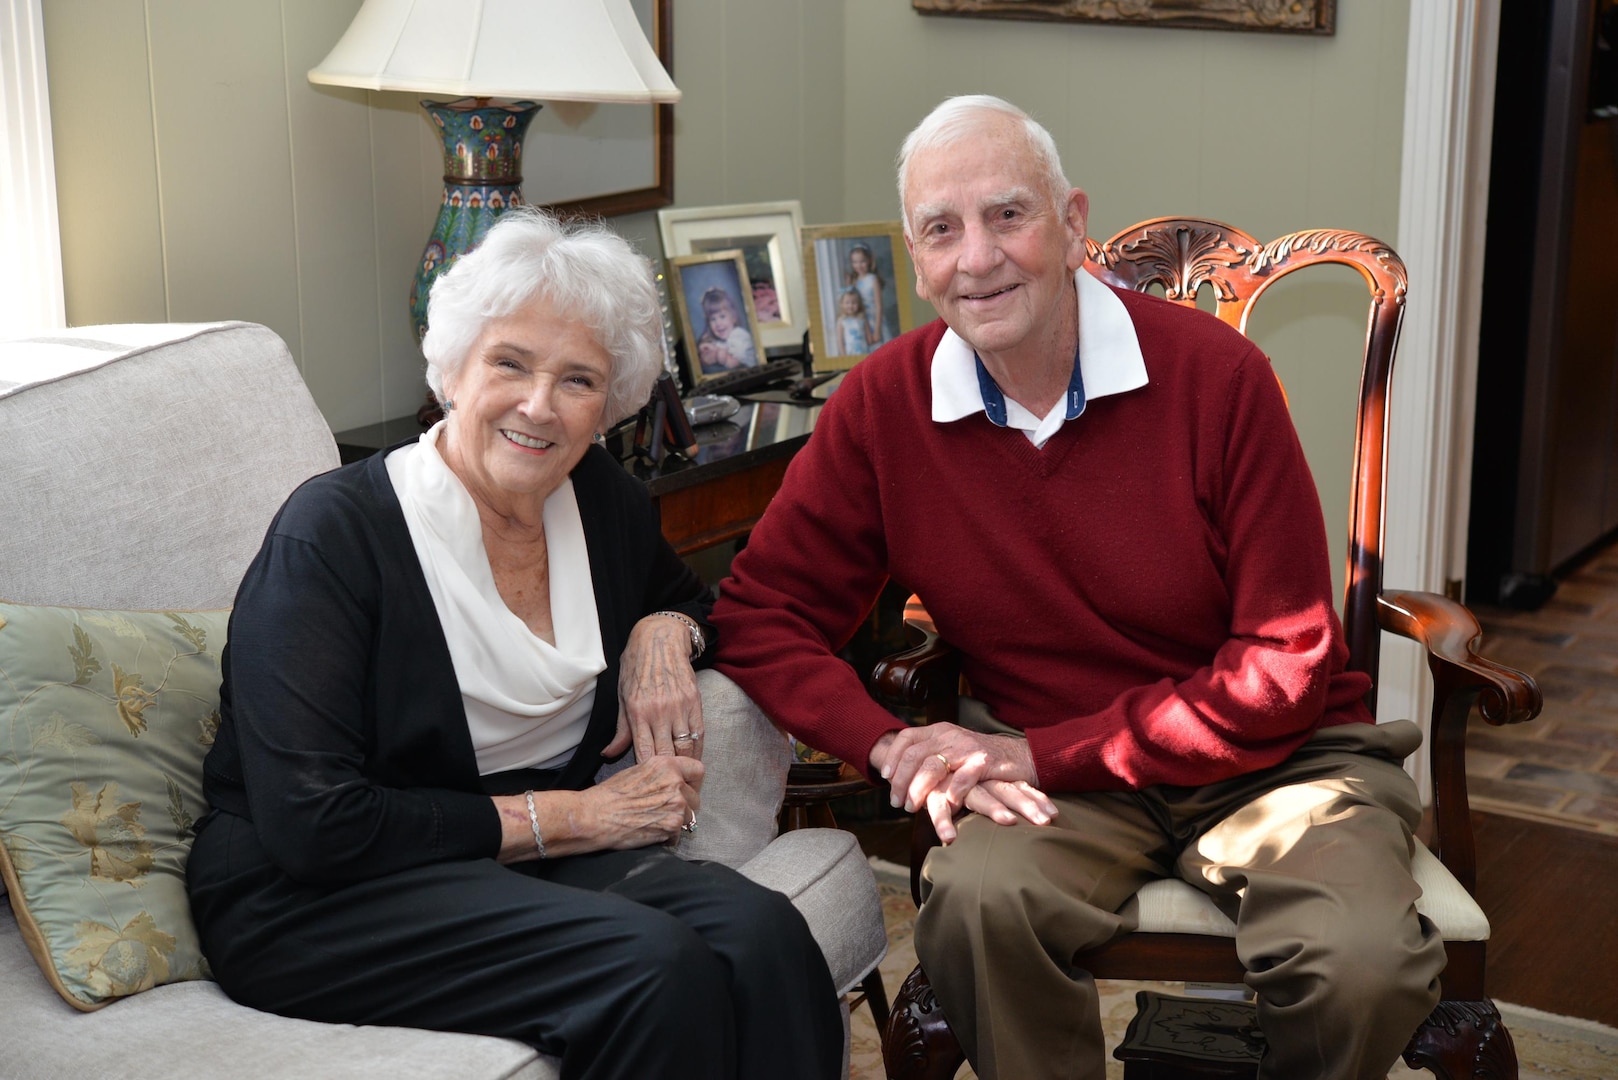 Retired Air Force Col. Carlyle "Smitty" Harris and wife Louise spend time together at their home Feb. 3, 2016, in Tupelo, Miss. Louise Harris faced a myriad of obstacles during the time her husband spent in captivity during the Vietnam War but prevailed in part due to her resilience.  

